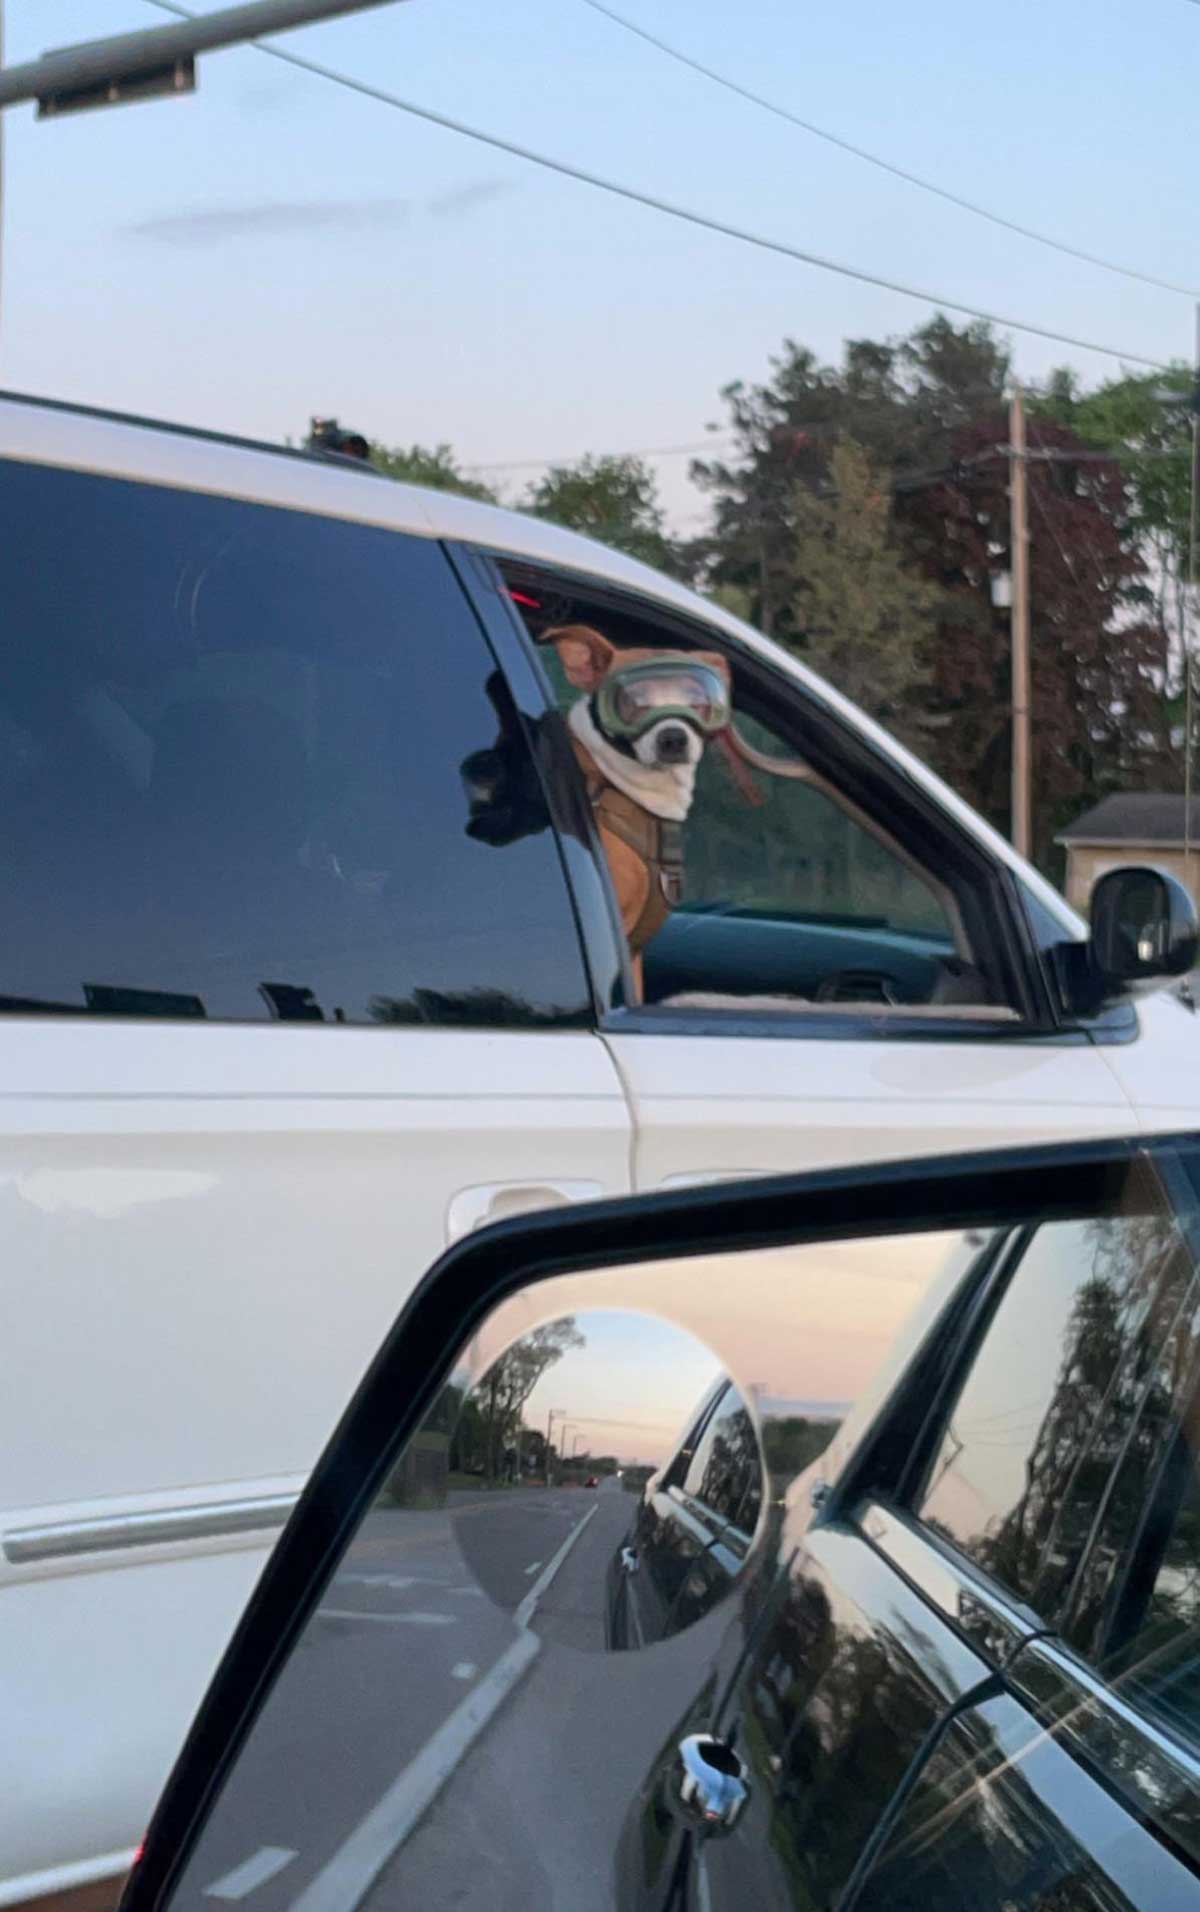 Saw this doggo living his best life